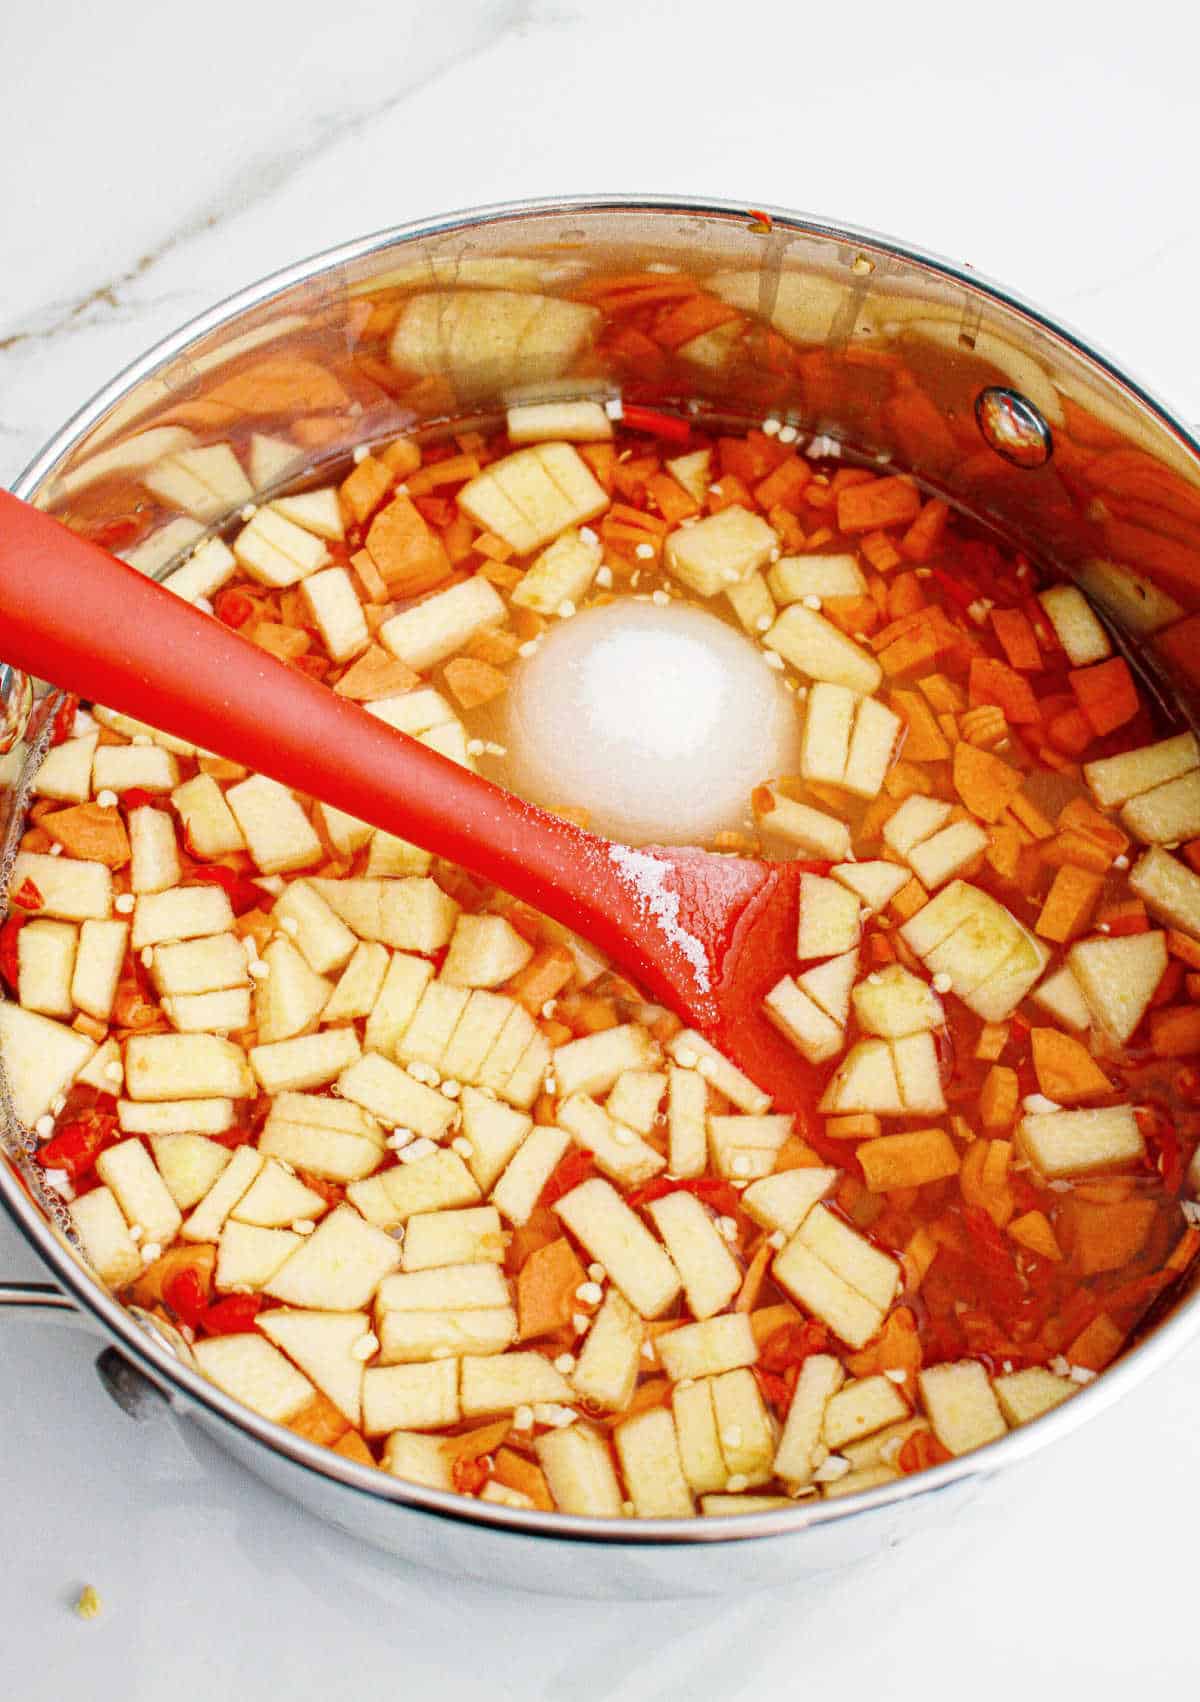 Large pot with ingredients for red chili jam with apples, sugar and vinegar. White surface.